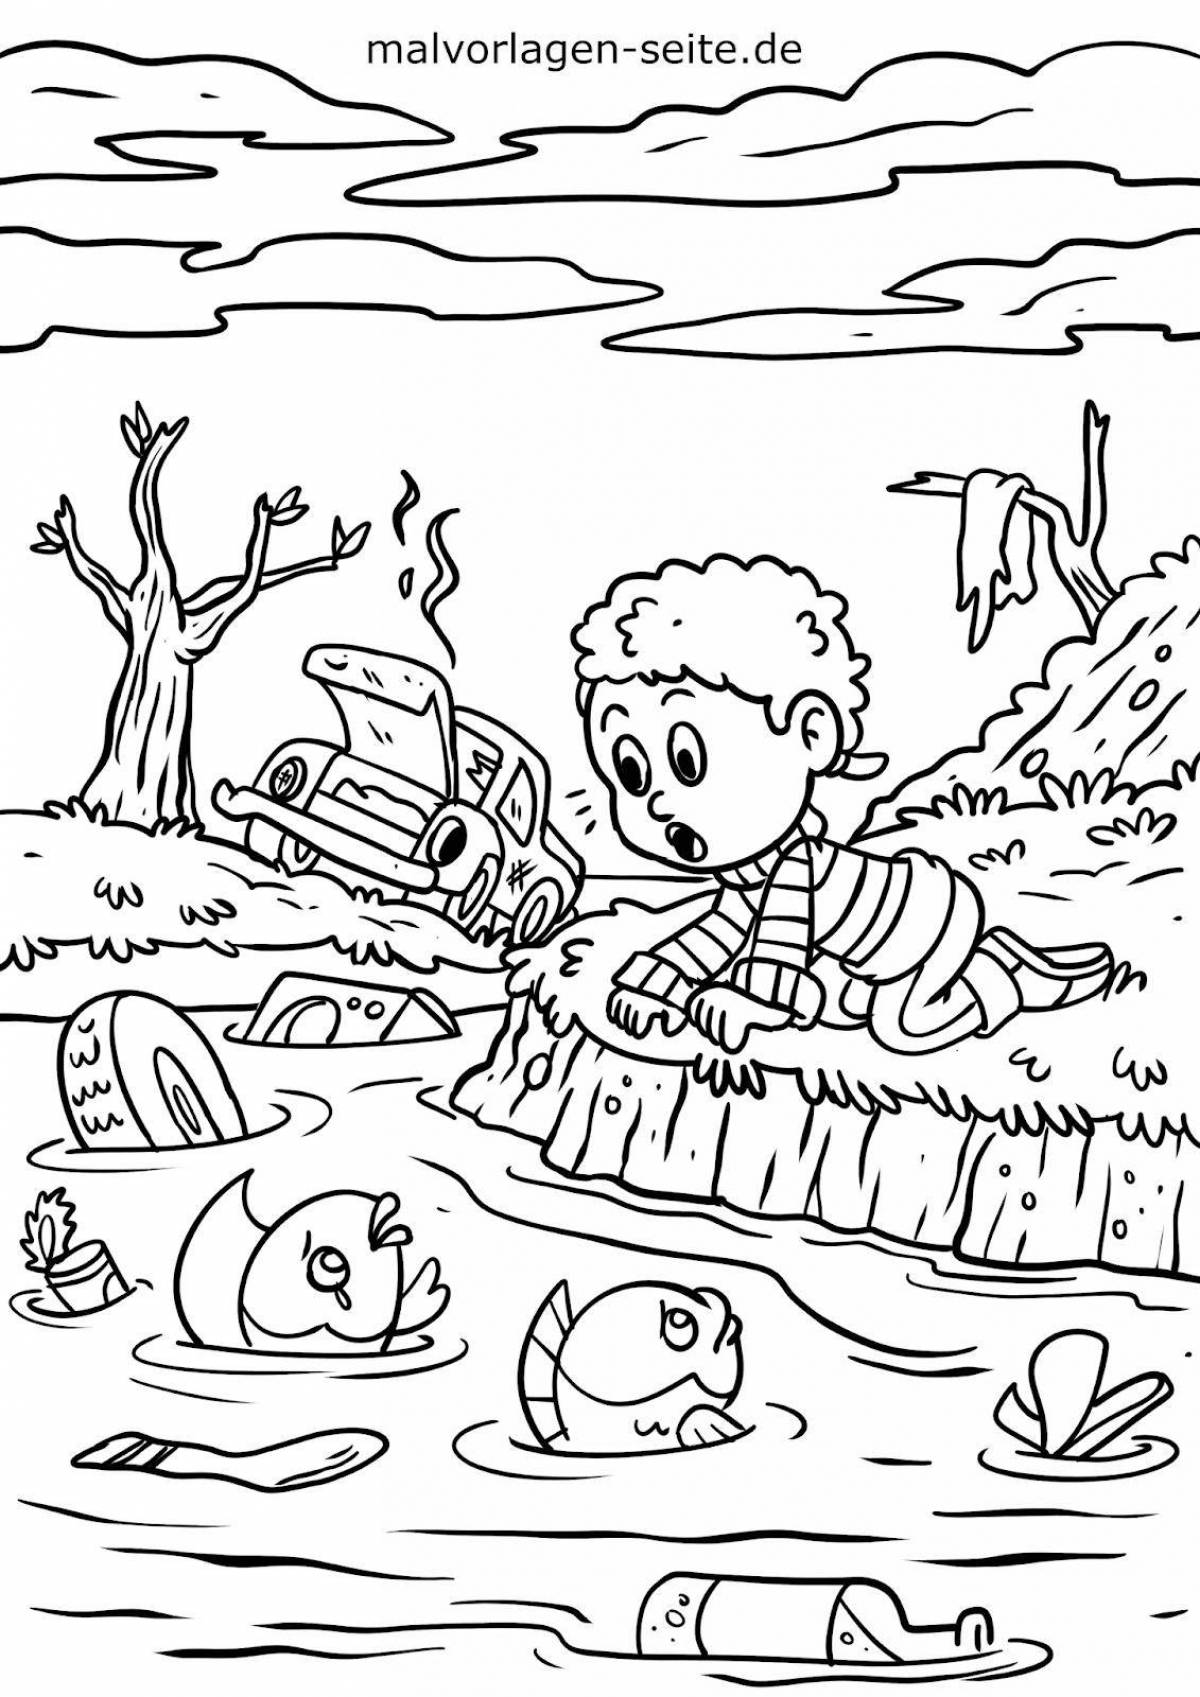 Coloring page stimulating environment for children